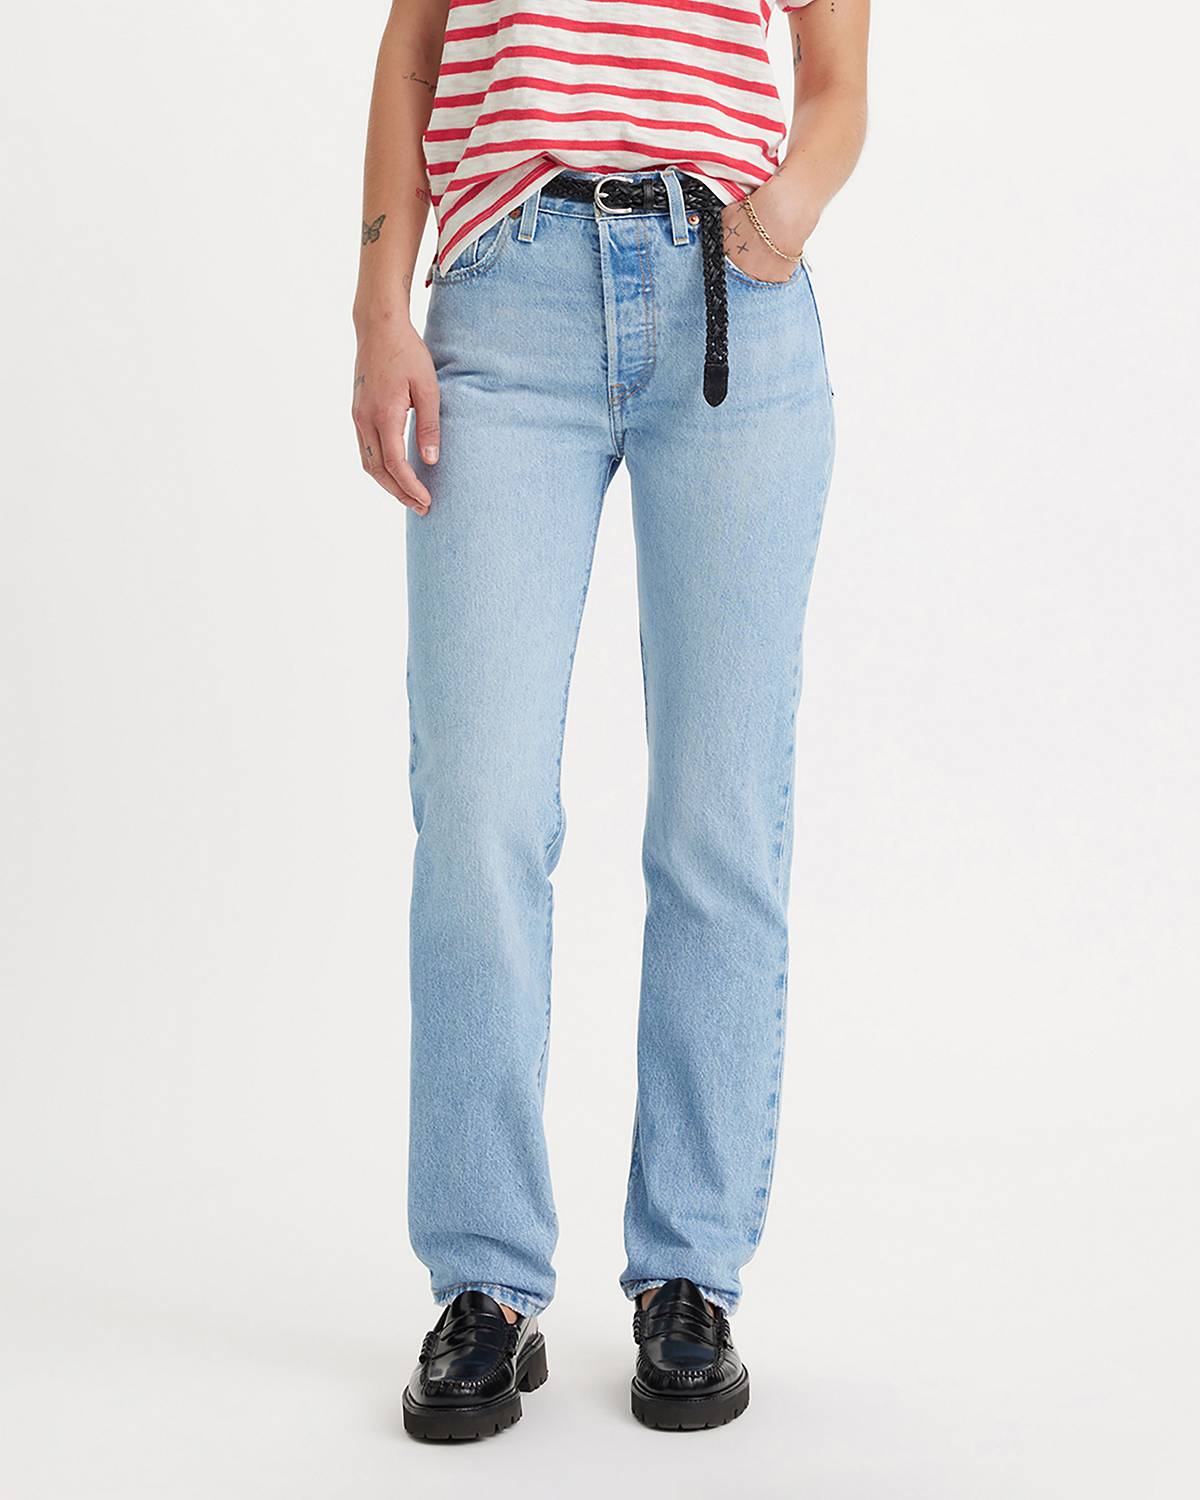 720 High Rise Super Skinny Jeans - High Waisted Jeans